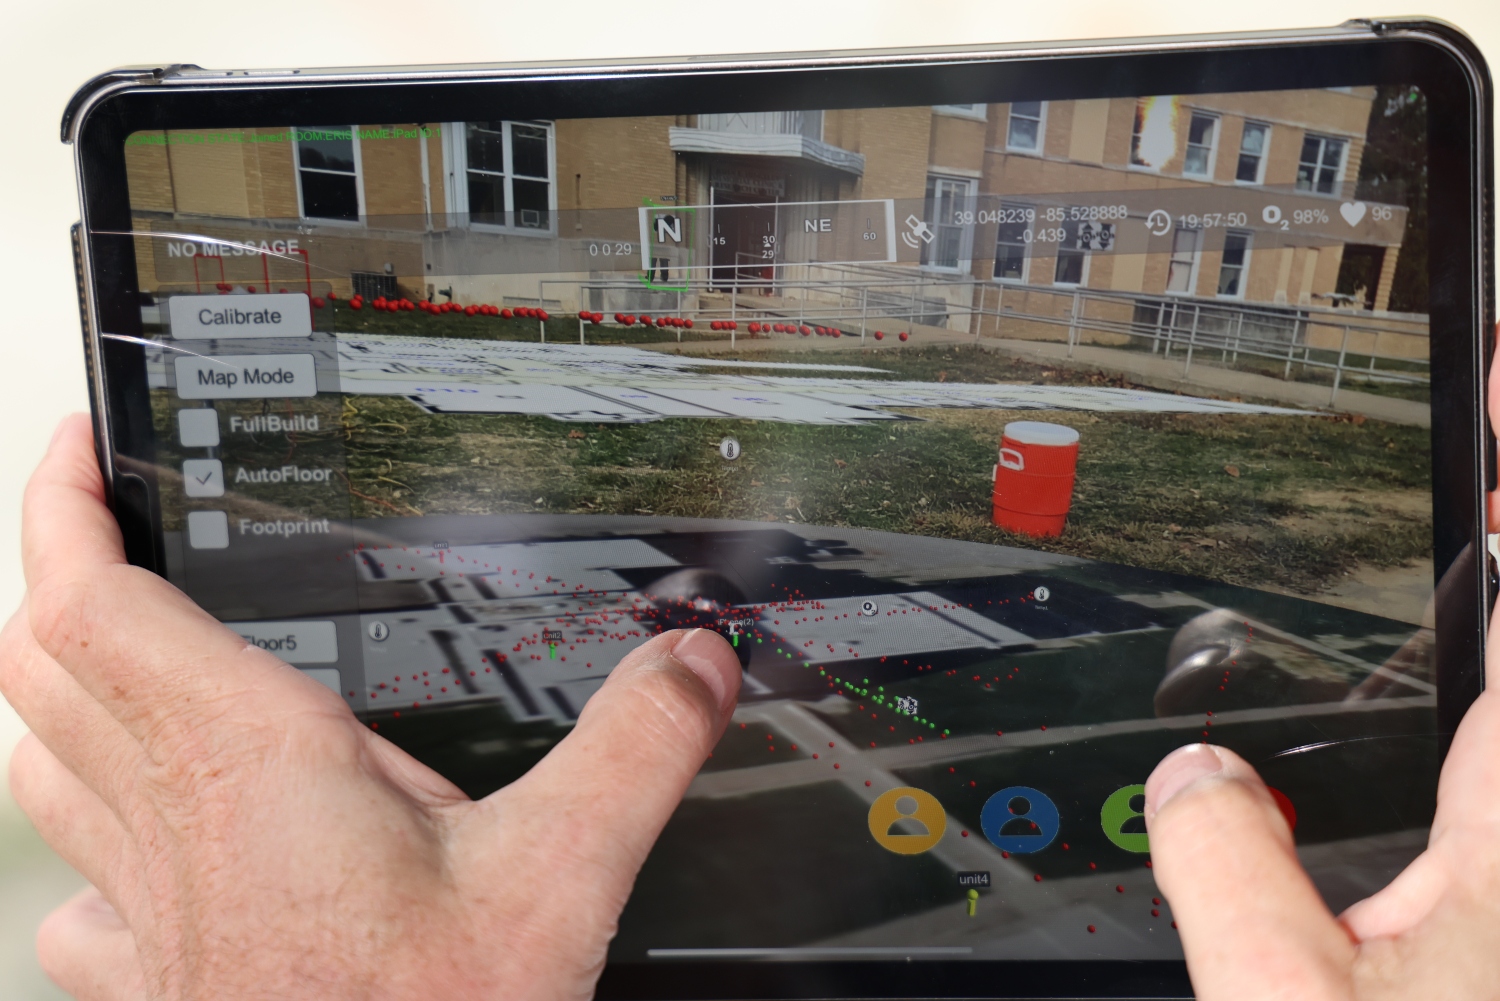 A person holds a tablet that shows both the outside structure of a brick building as well as the aerial view. Red and green location tracking dots are scattered throughout the view.